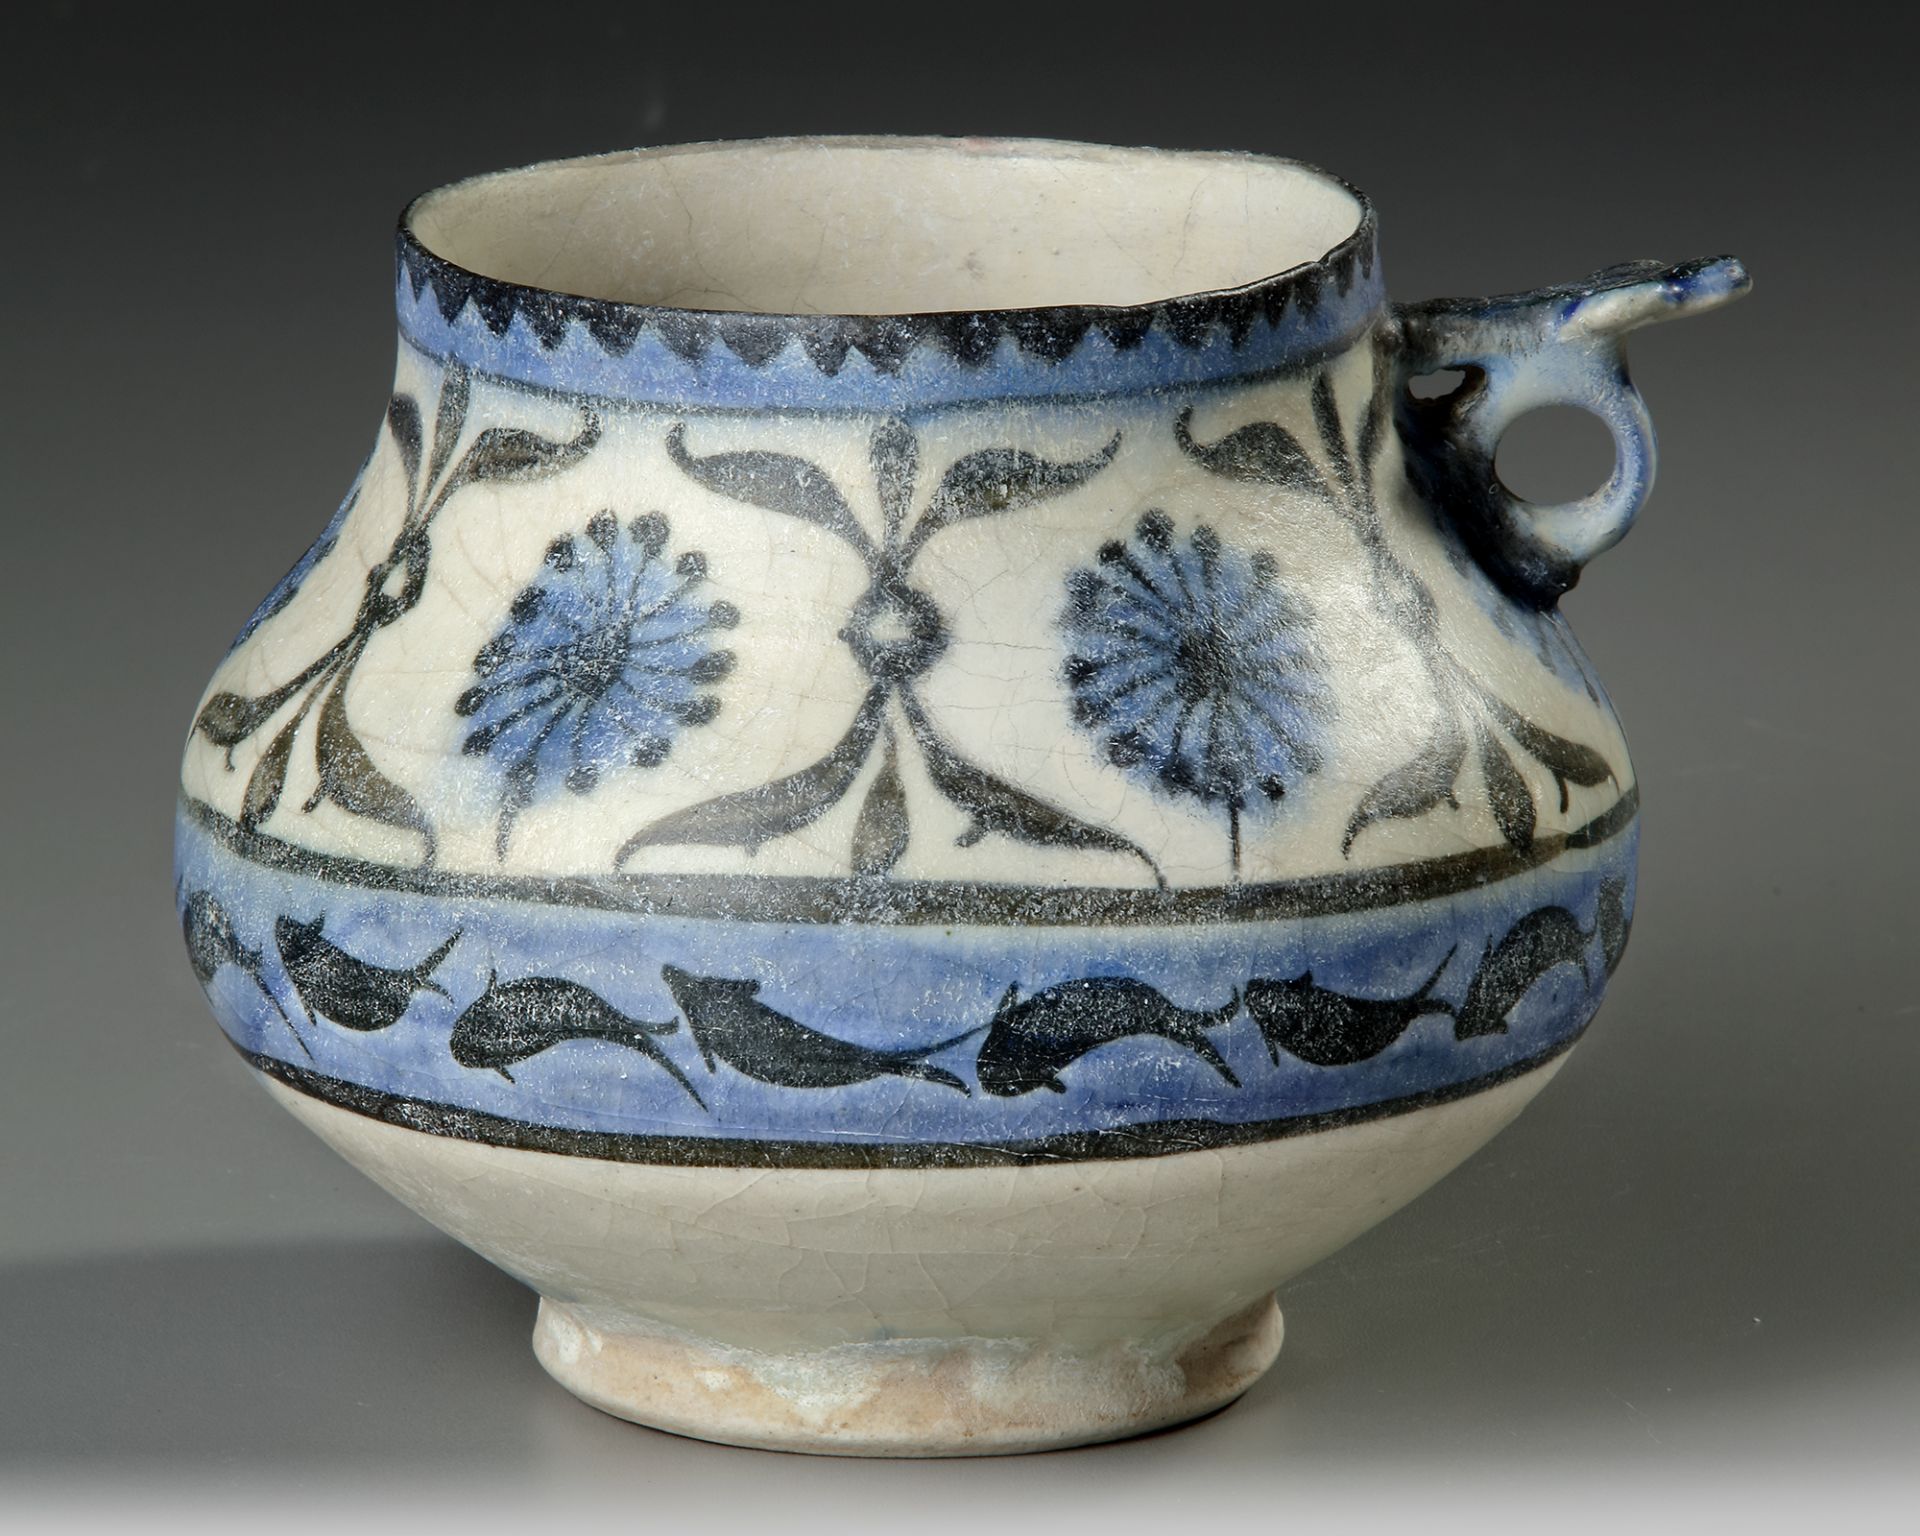 A KASHAN POTTERY JUG, PERSIA, EARLY 13TH CENTURY - Image 2 of 4